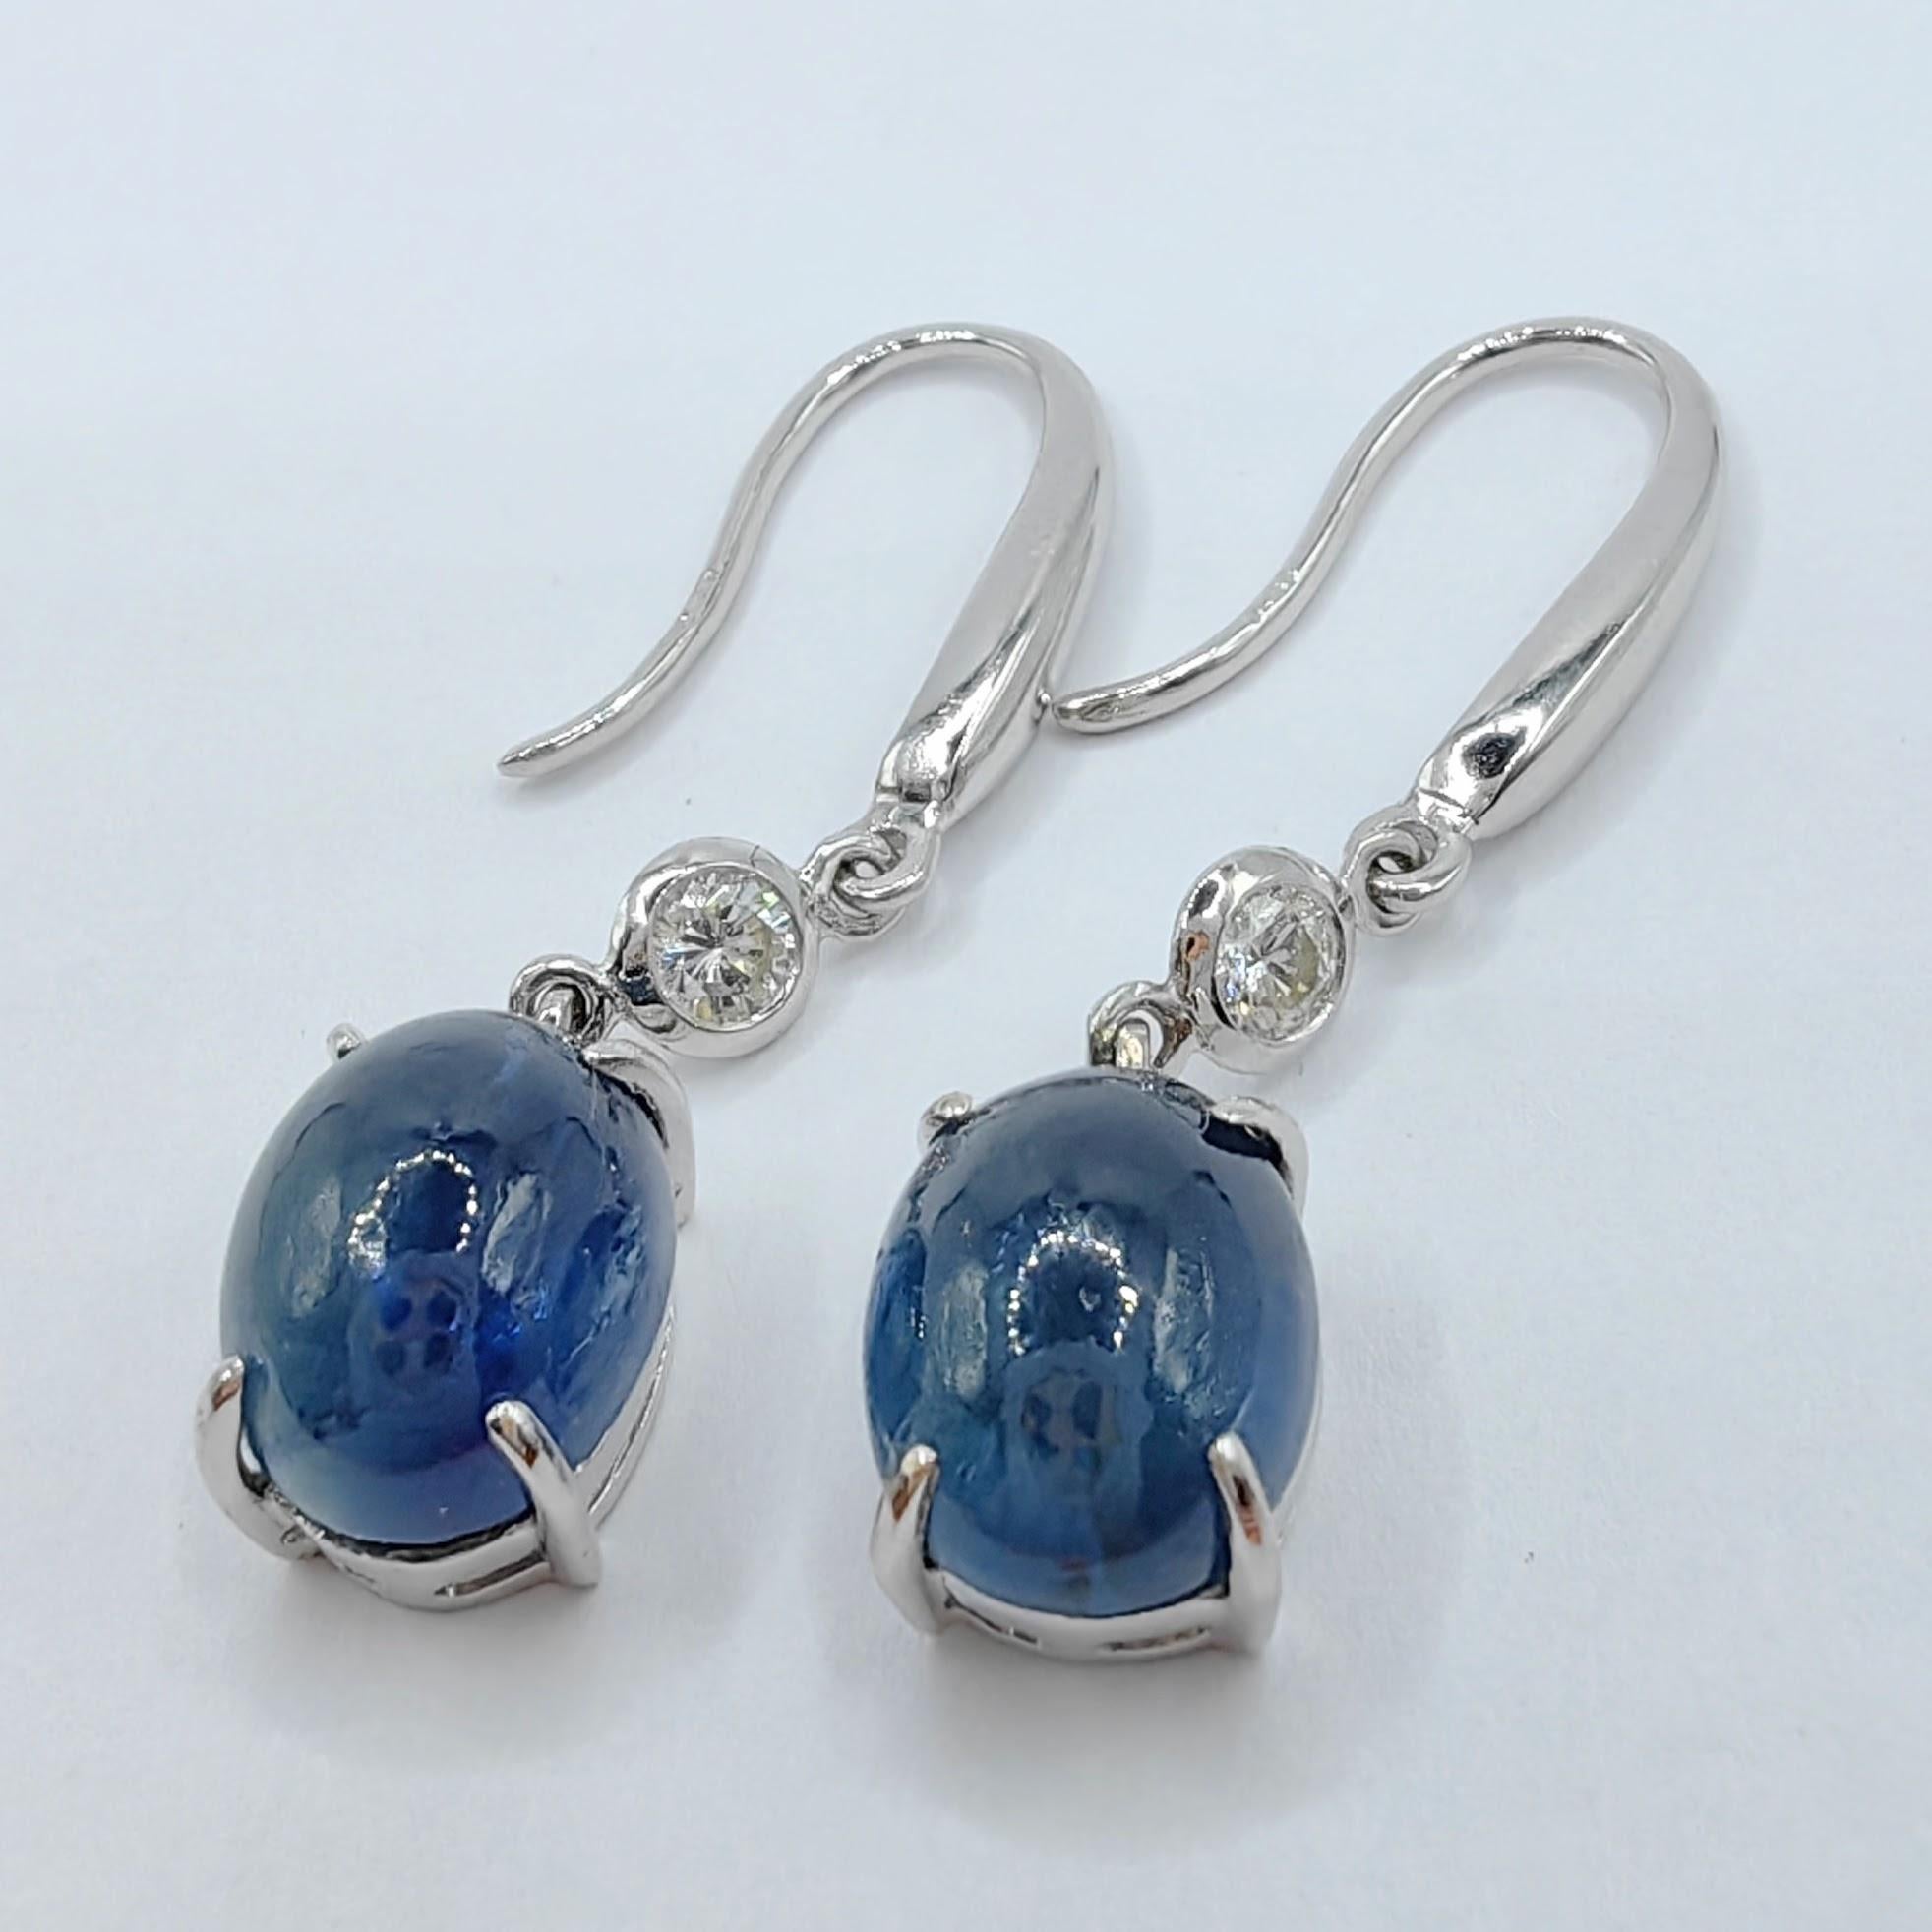 6.94ct Cabochon Blue Sapphire Diamond Dangling Earrings in 18K White Gold For Sale 1